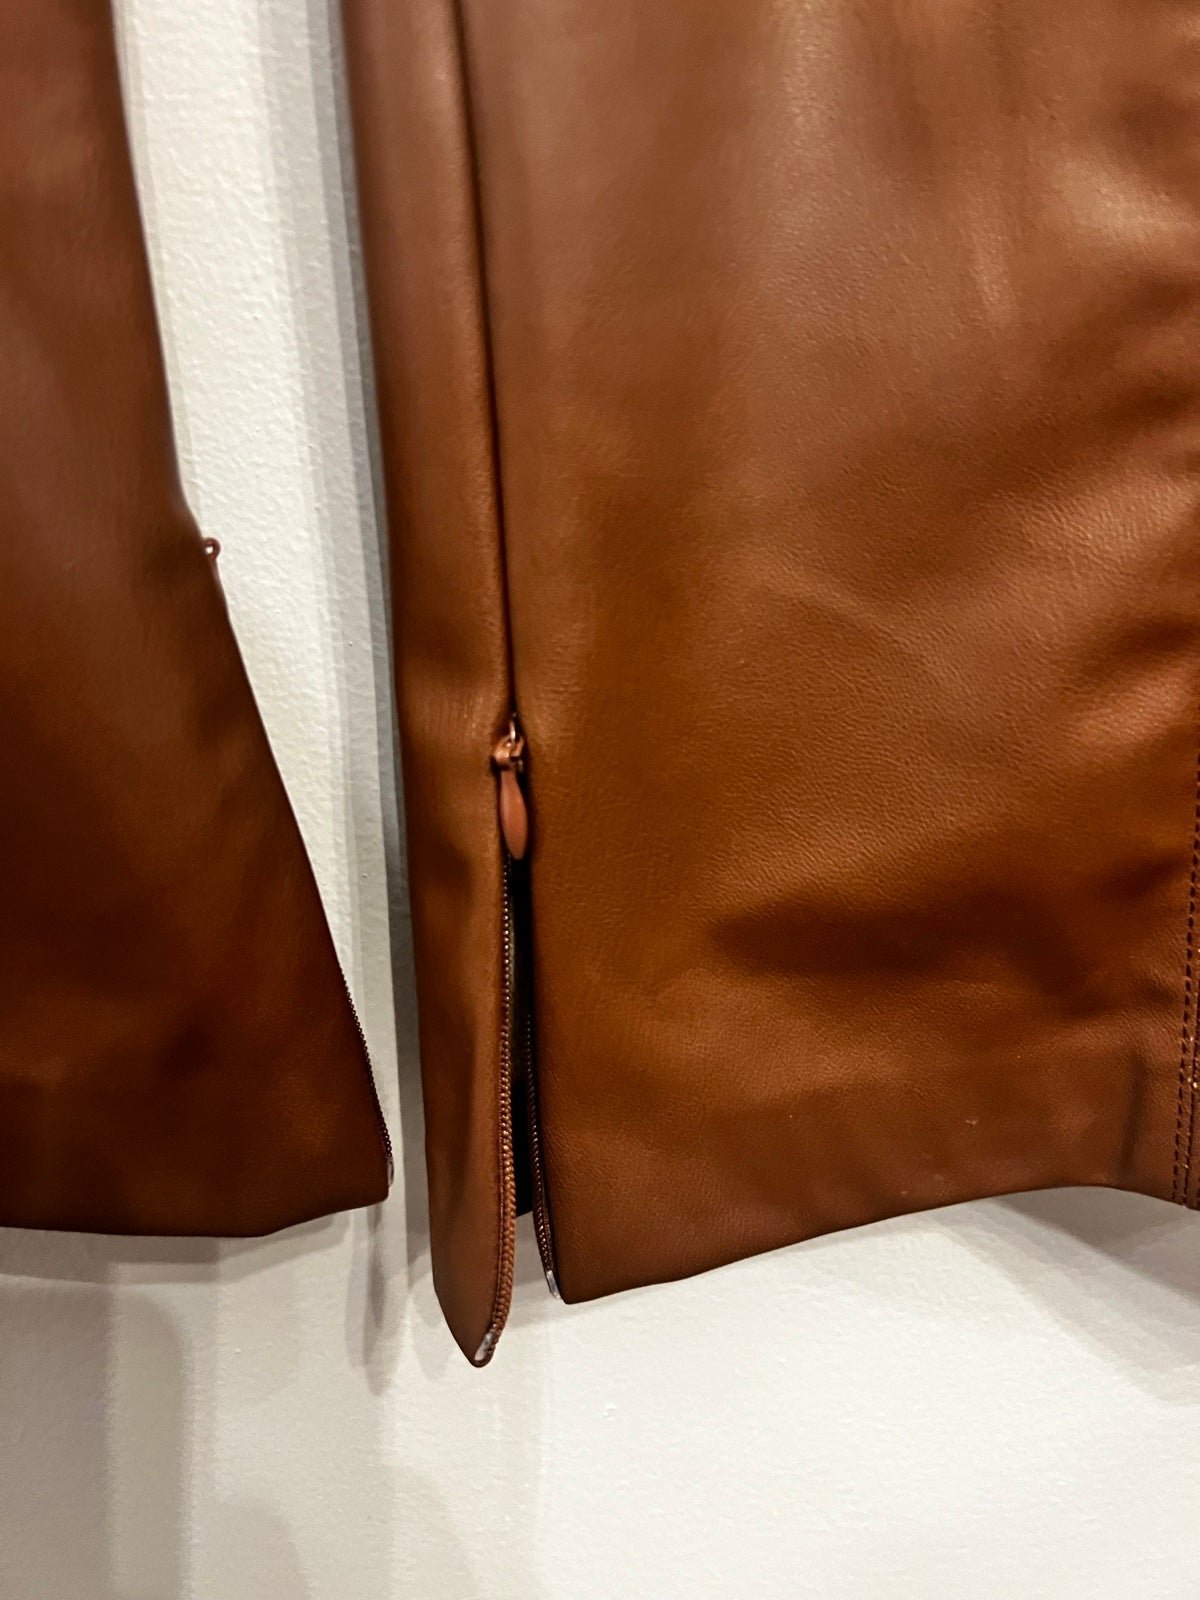 cheapest place to buy  Zara Brown Faux Vegan Leather Pants flair ankle Size Small Side Ankle Zipper j84VSl5mJ best sale